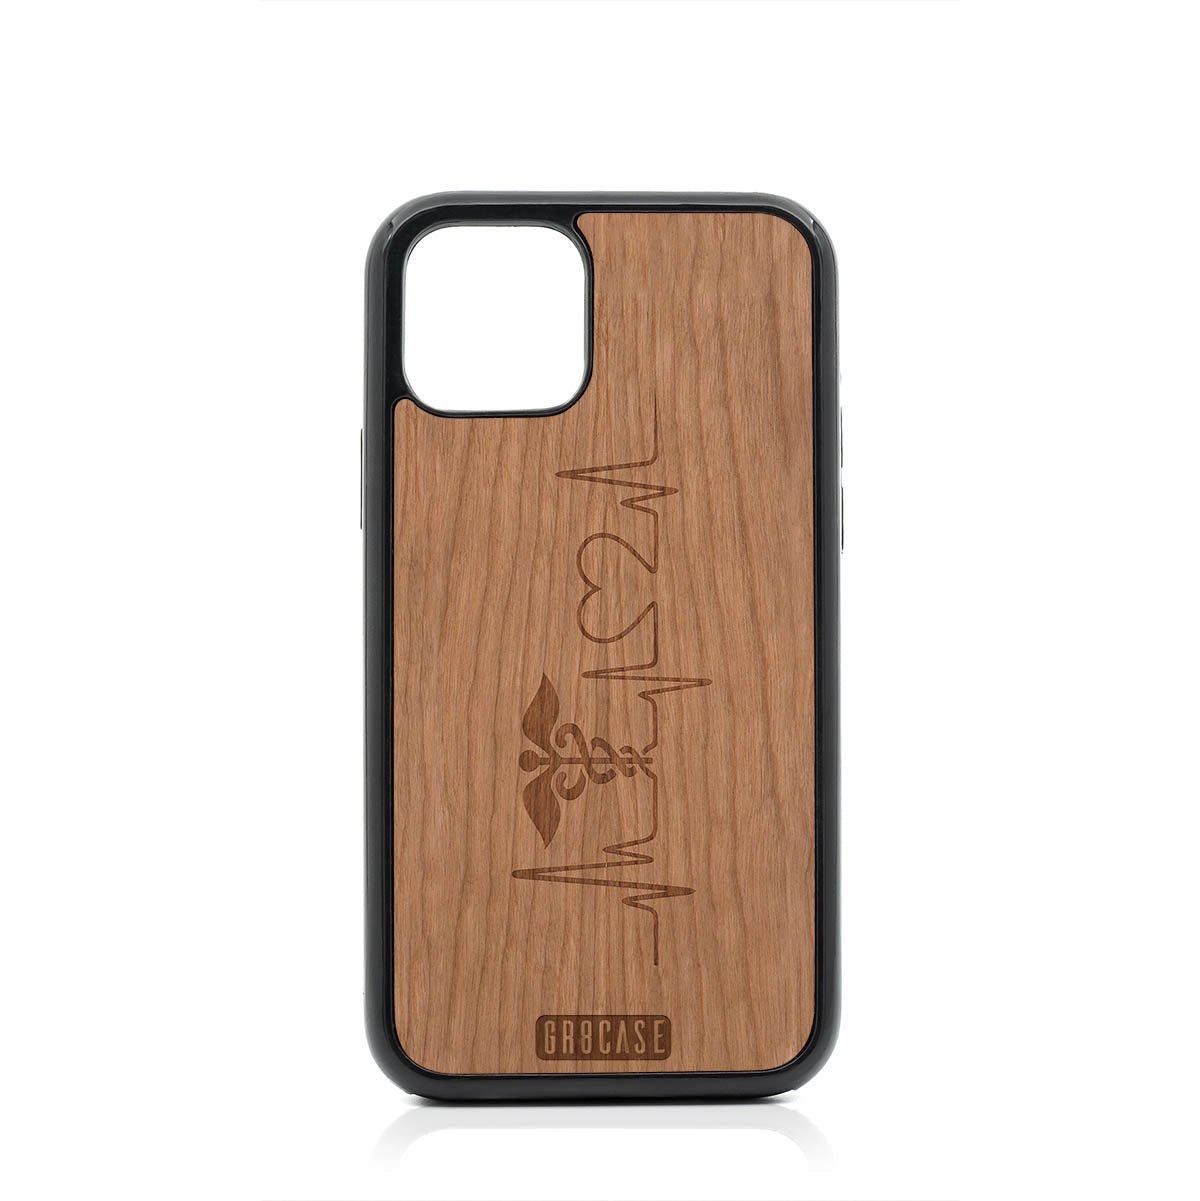 Hero's Heart (Nurse, Doctor) Design Wood Case For iPhone 11 Pro by GR8CASE